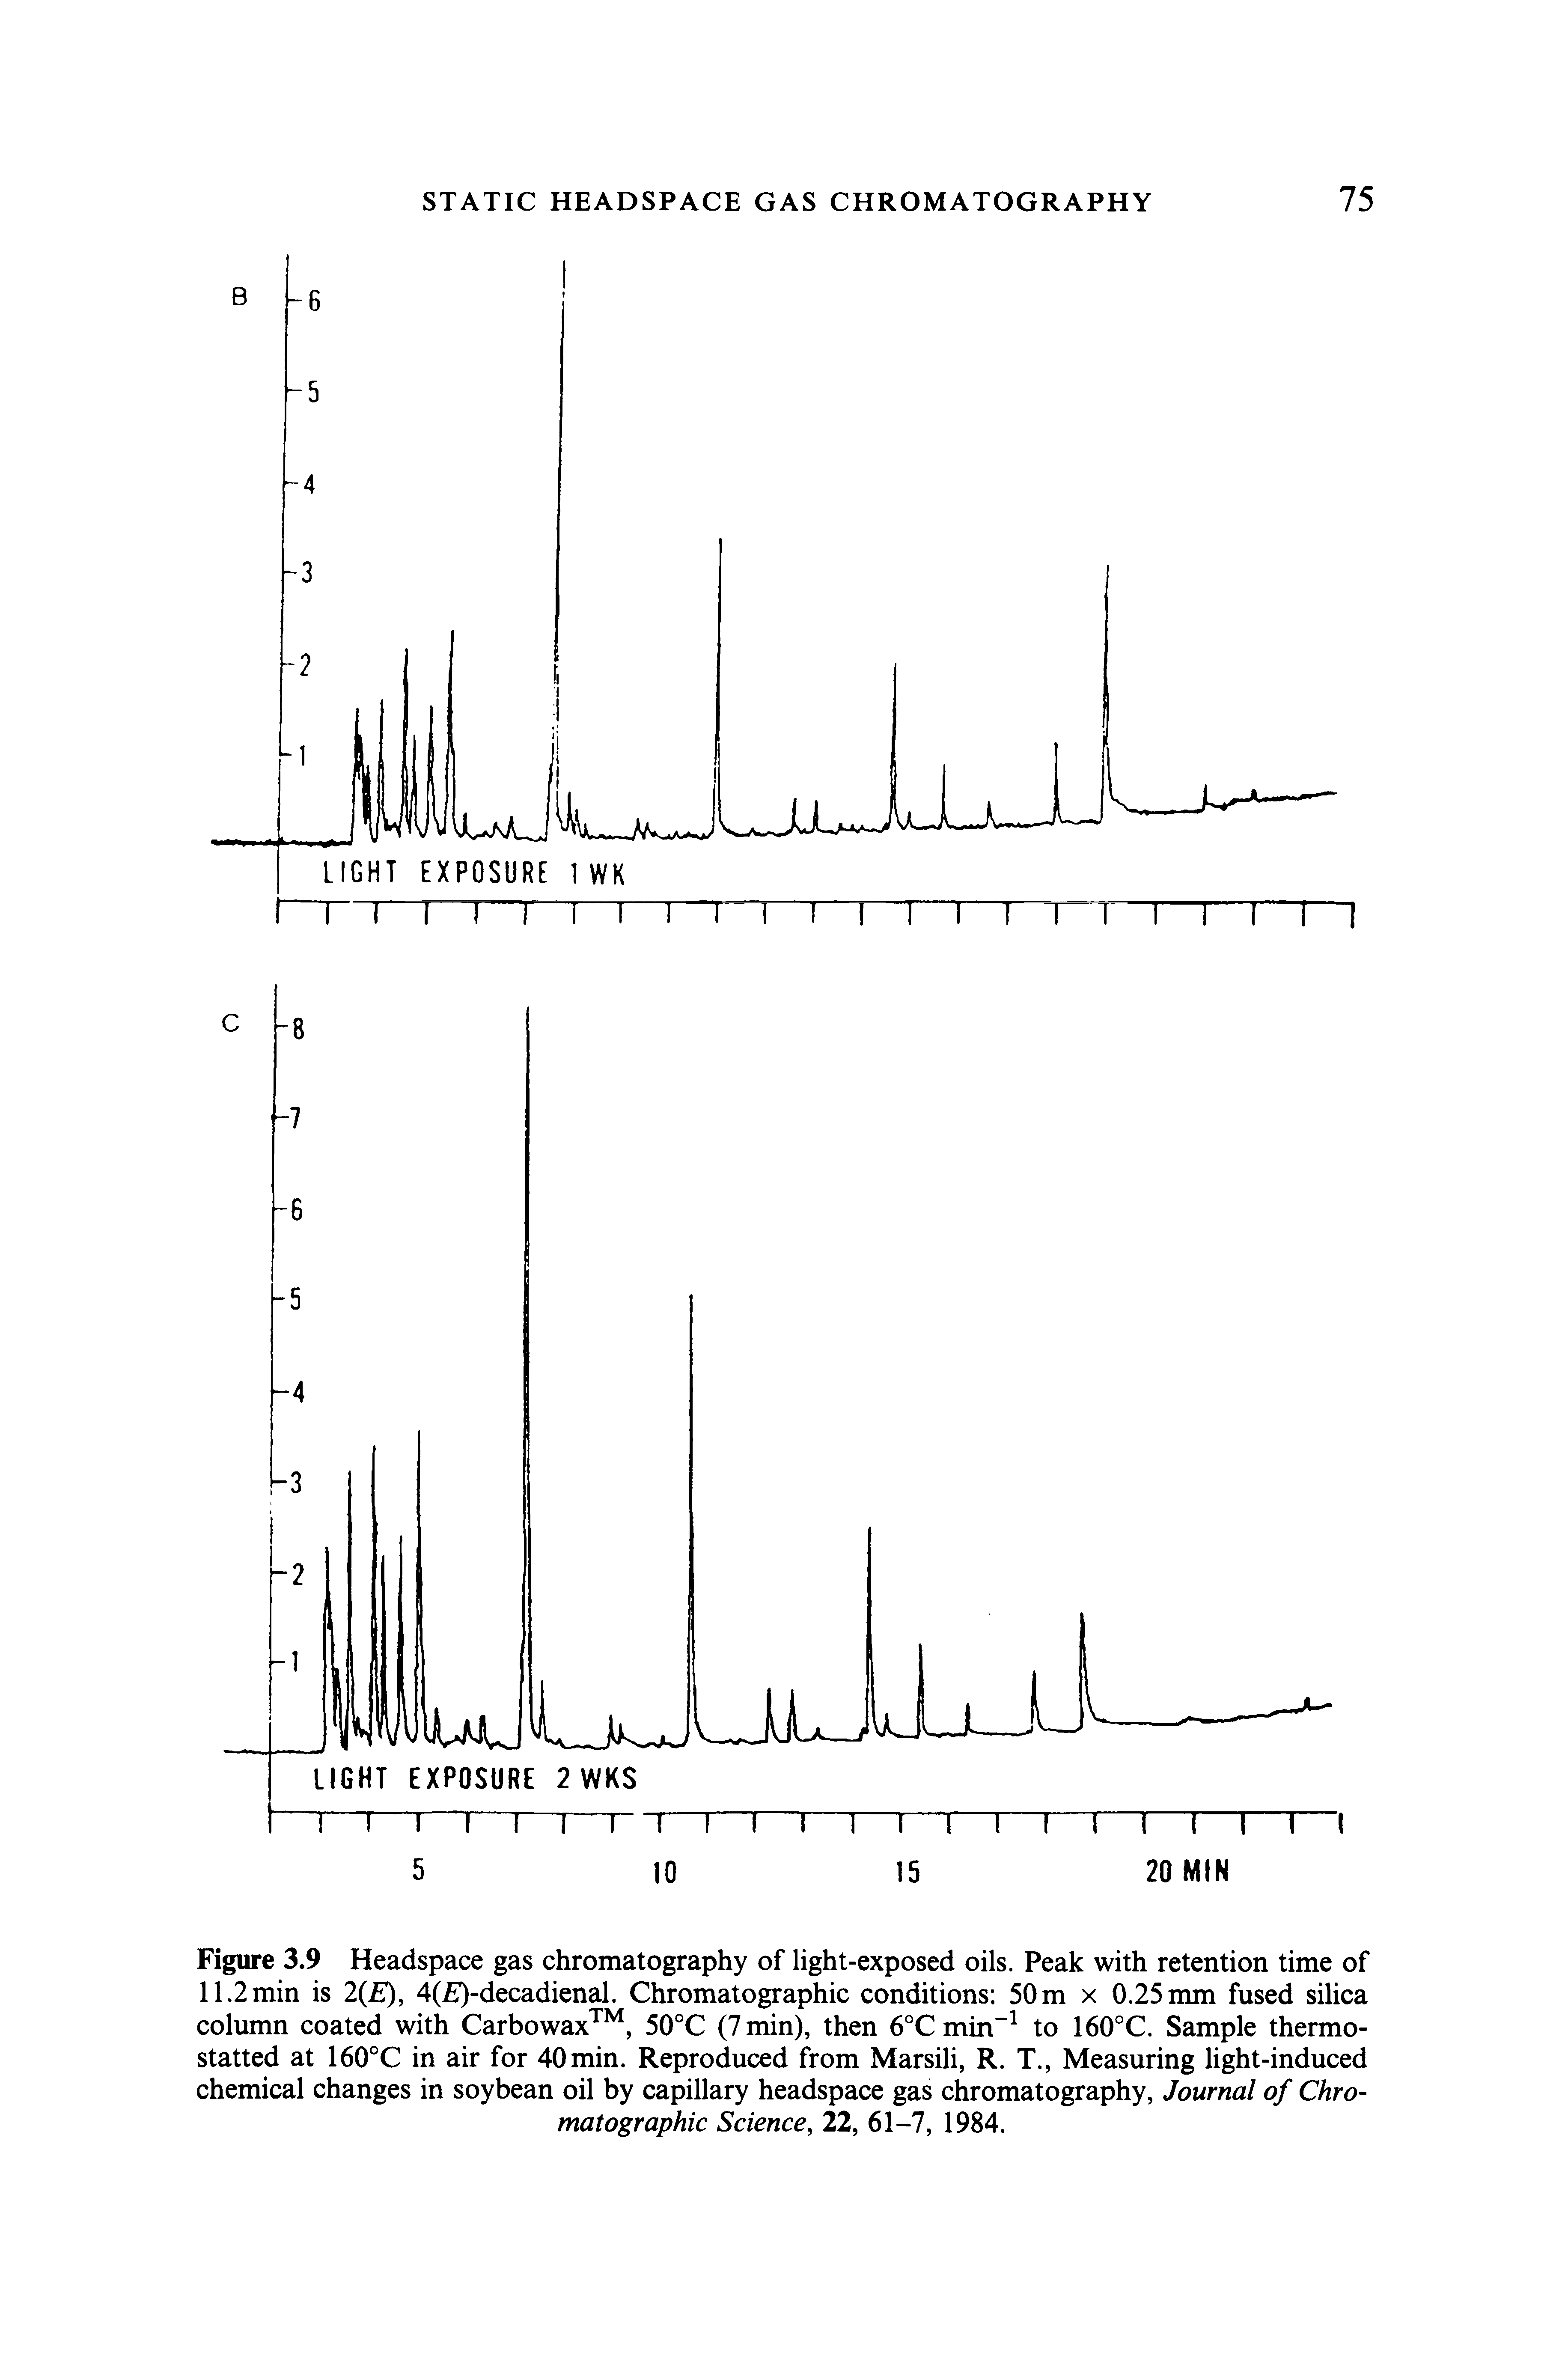 Figure 3.9 Headspace gas chromatography of light-exposed oils. Peak with retention time of 11.2 min is 2 E), 4( )-decadienal. Chromatographic conditions 50 m x 0.25 mm fused silica column coated with Carbowax , 50°C (7 min), then 6°Cmin to 160°C. Sample thermo-statted at 160°C in air for 40 min. Reproduced from Marsili, R. T., Measuring light-induced chemical changes in soybean oil by capillary headspace gas chromatography, Journal of Chromatographic Science, 22, 61-7, 1984.